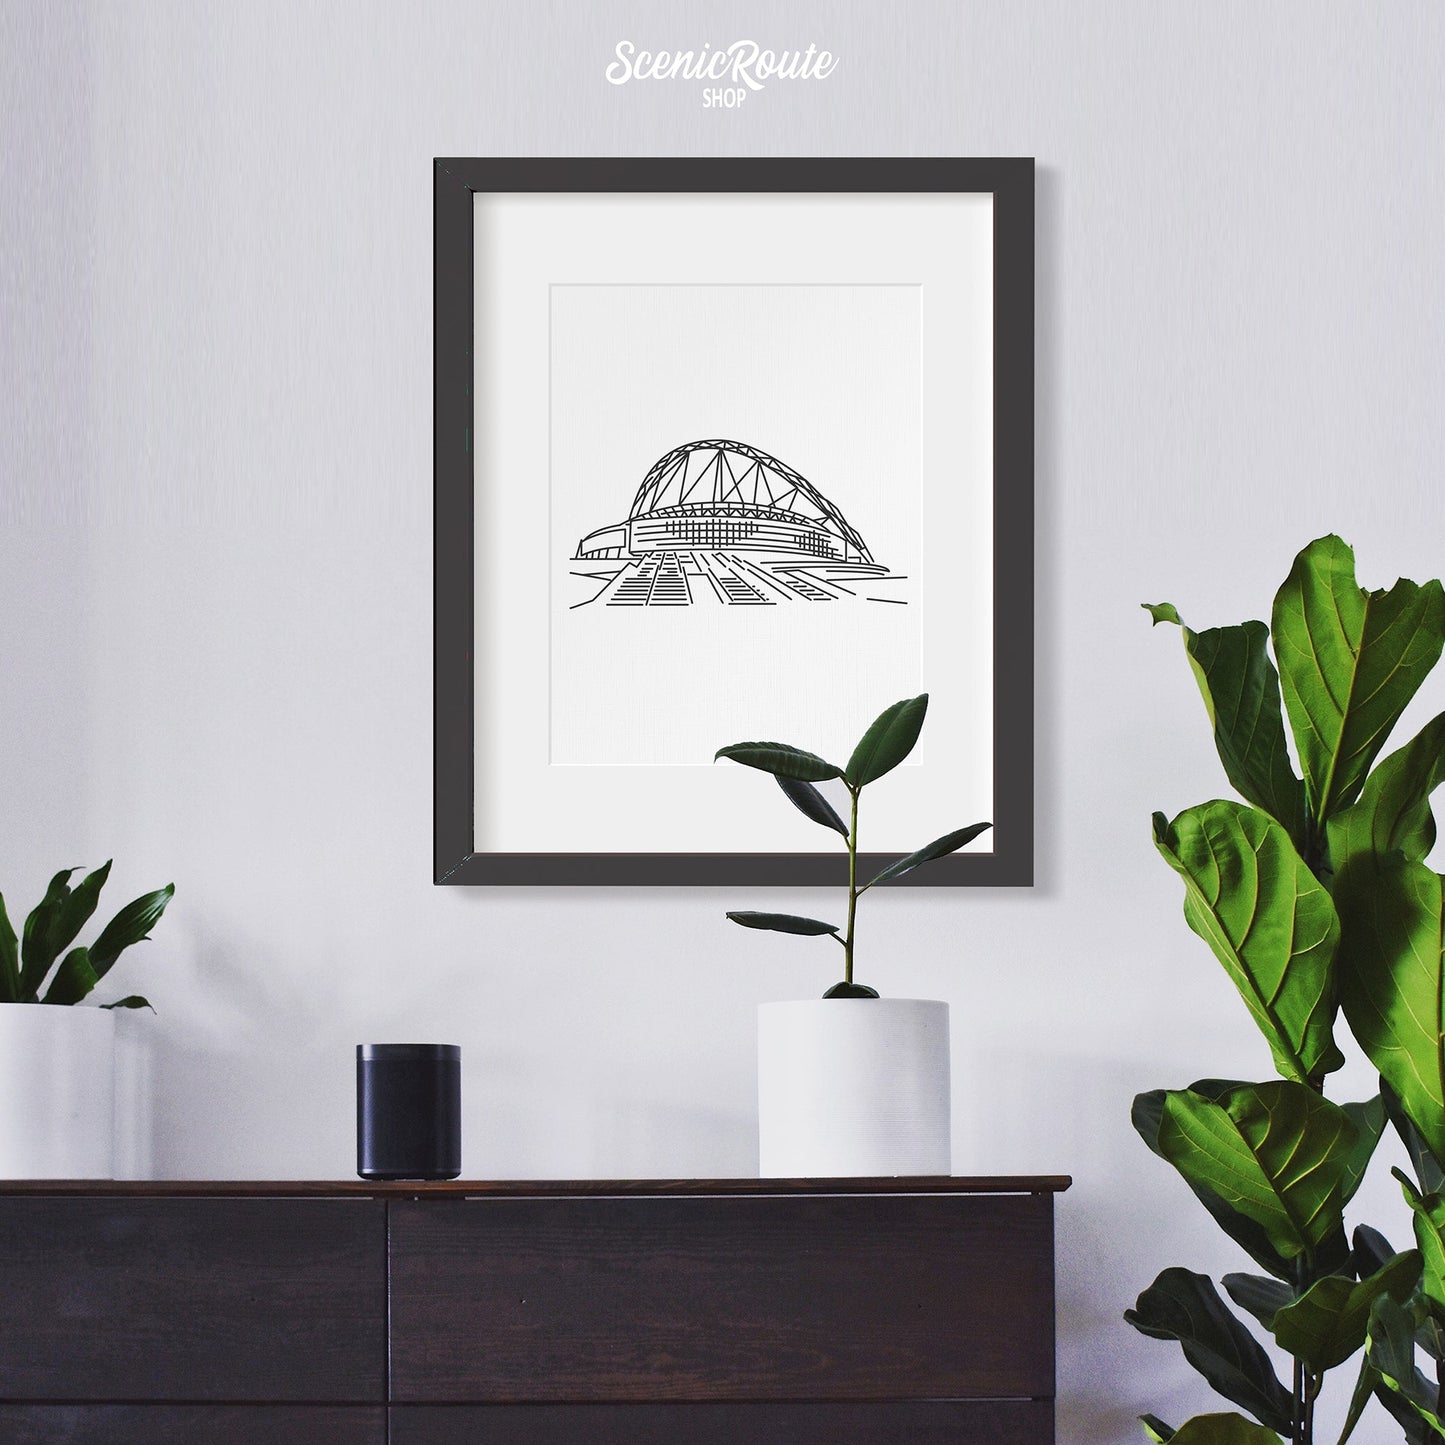 A framed line art drawing of Wembley Stadium above a dresser with plants